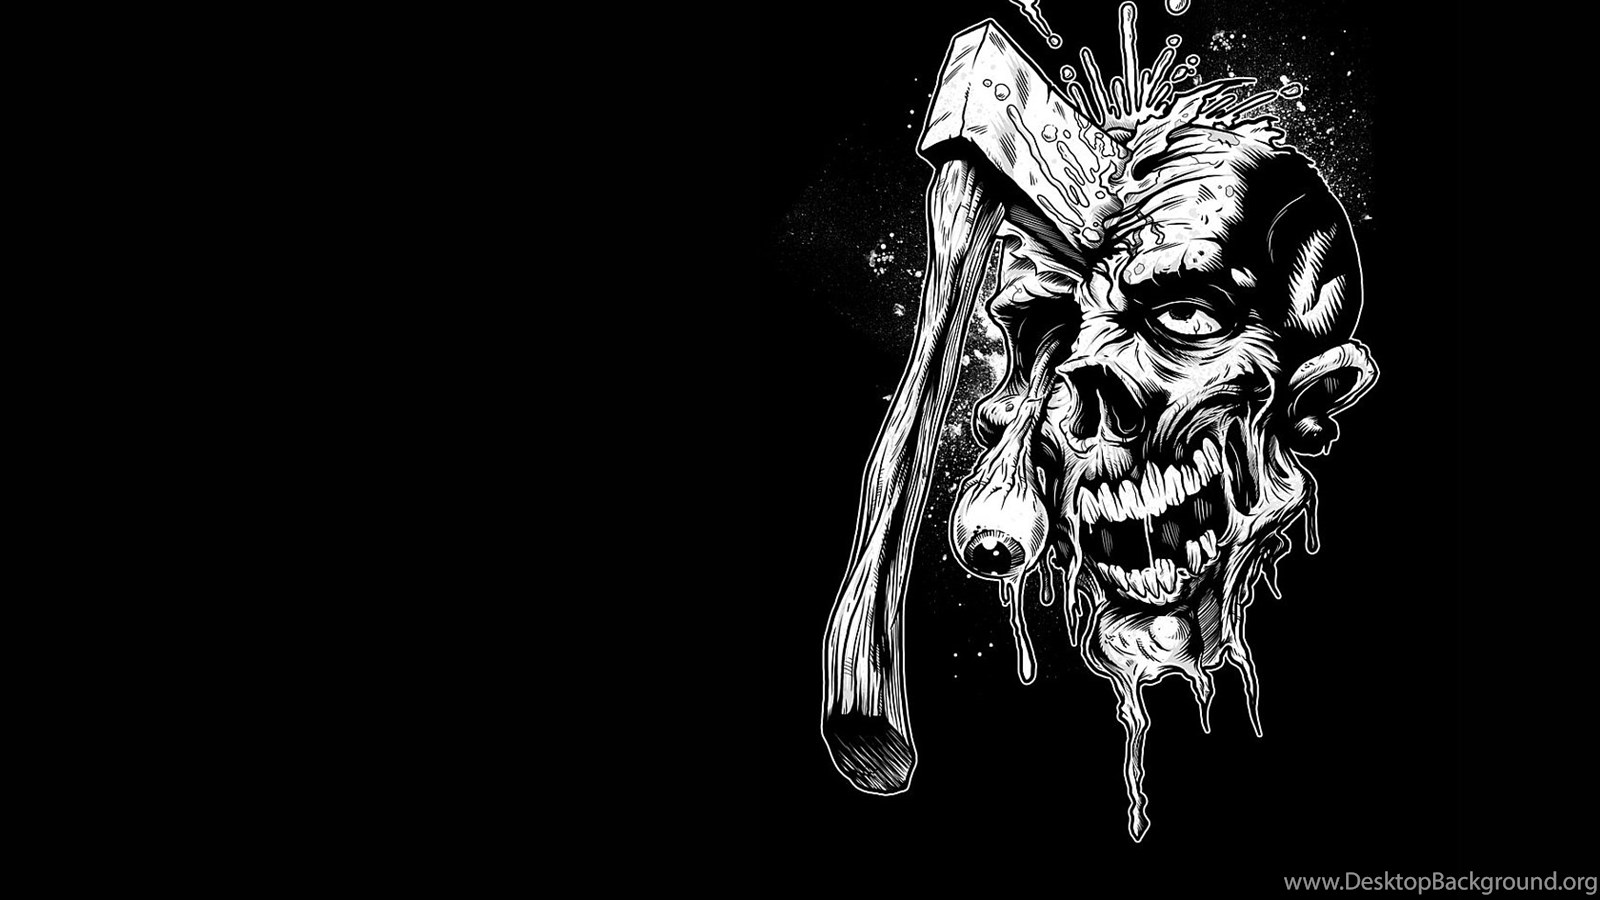 Download The Axed Zombie Wallpaper Axed Zombie Iphone Wallpapers